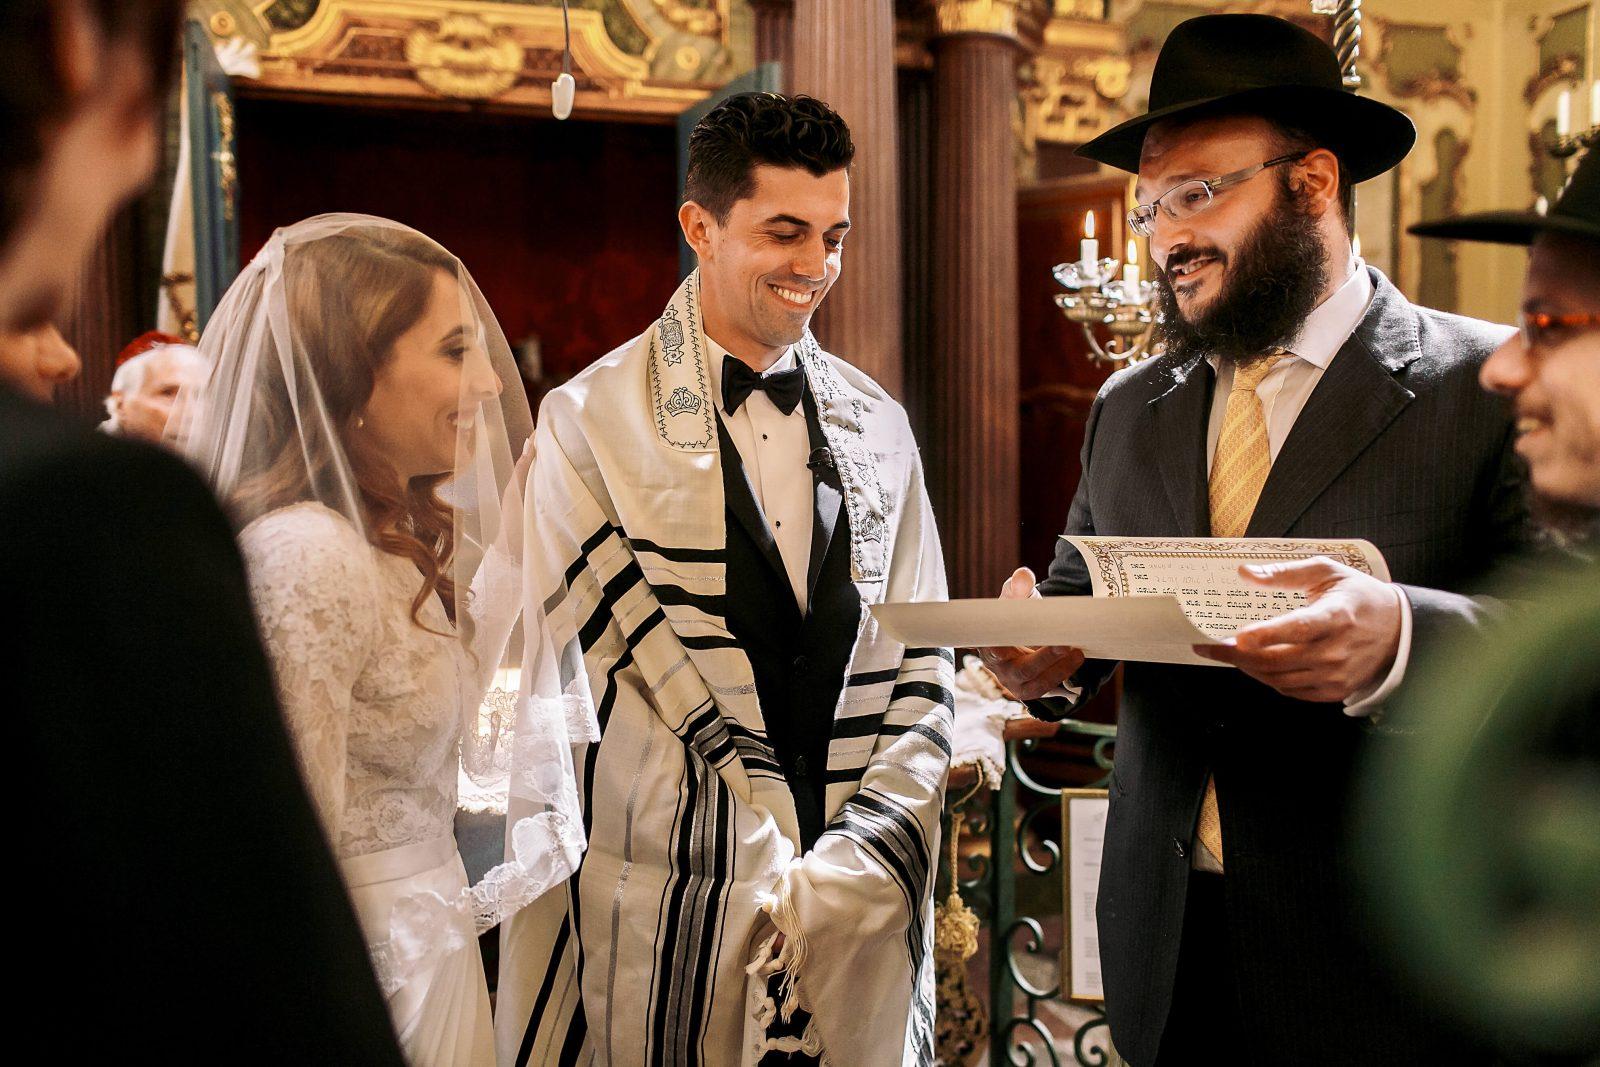 wedding traditions jewish style in clarence house sydney australia